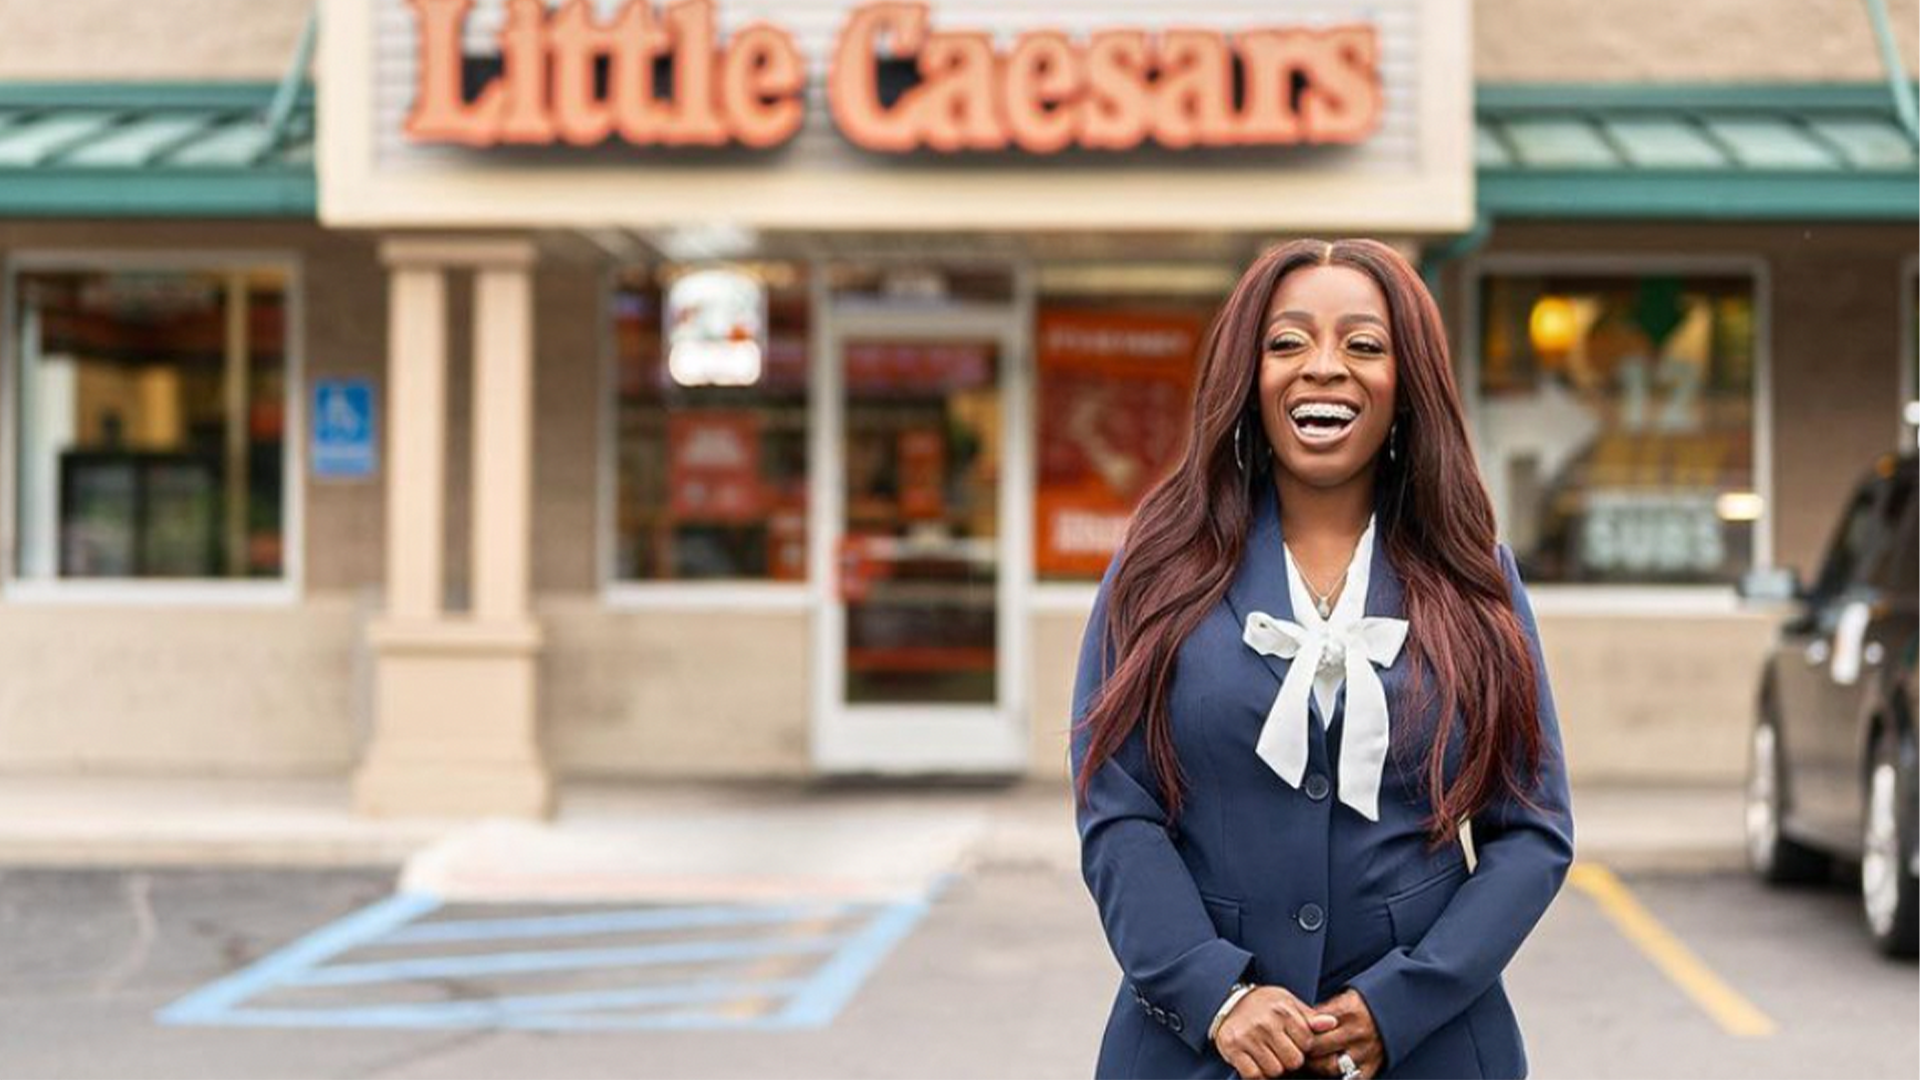 'I'm The First And Only Black Woman In The City And County' — Detroit Entrepreneur Buys Little Caesars Franchise As A Birthday Gift To Herself